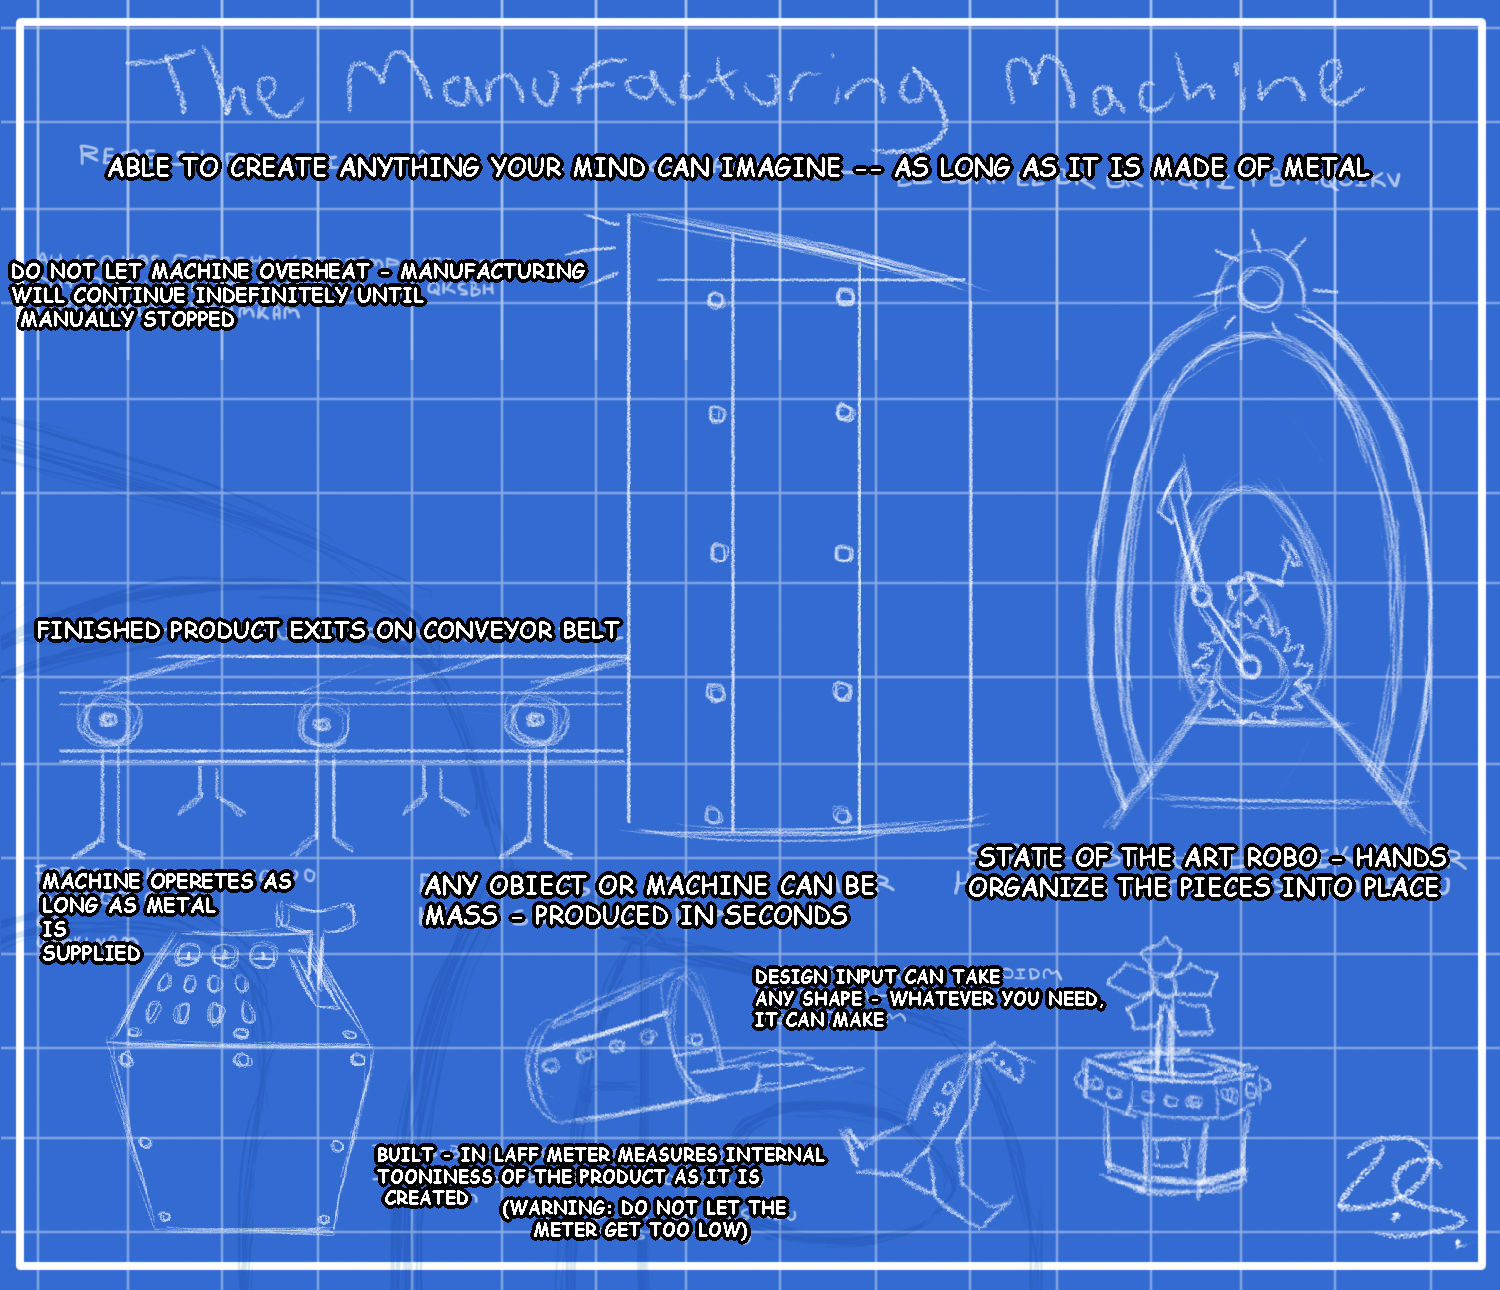 Decrypted version of The Manufacturing Machine blueprint.